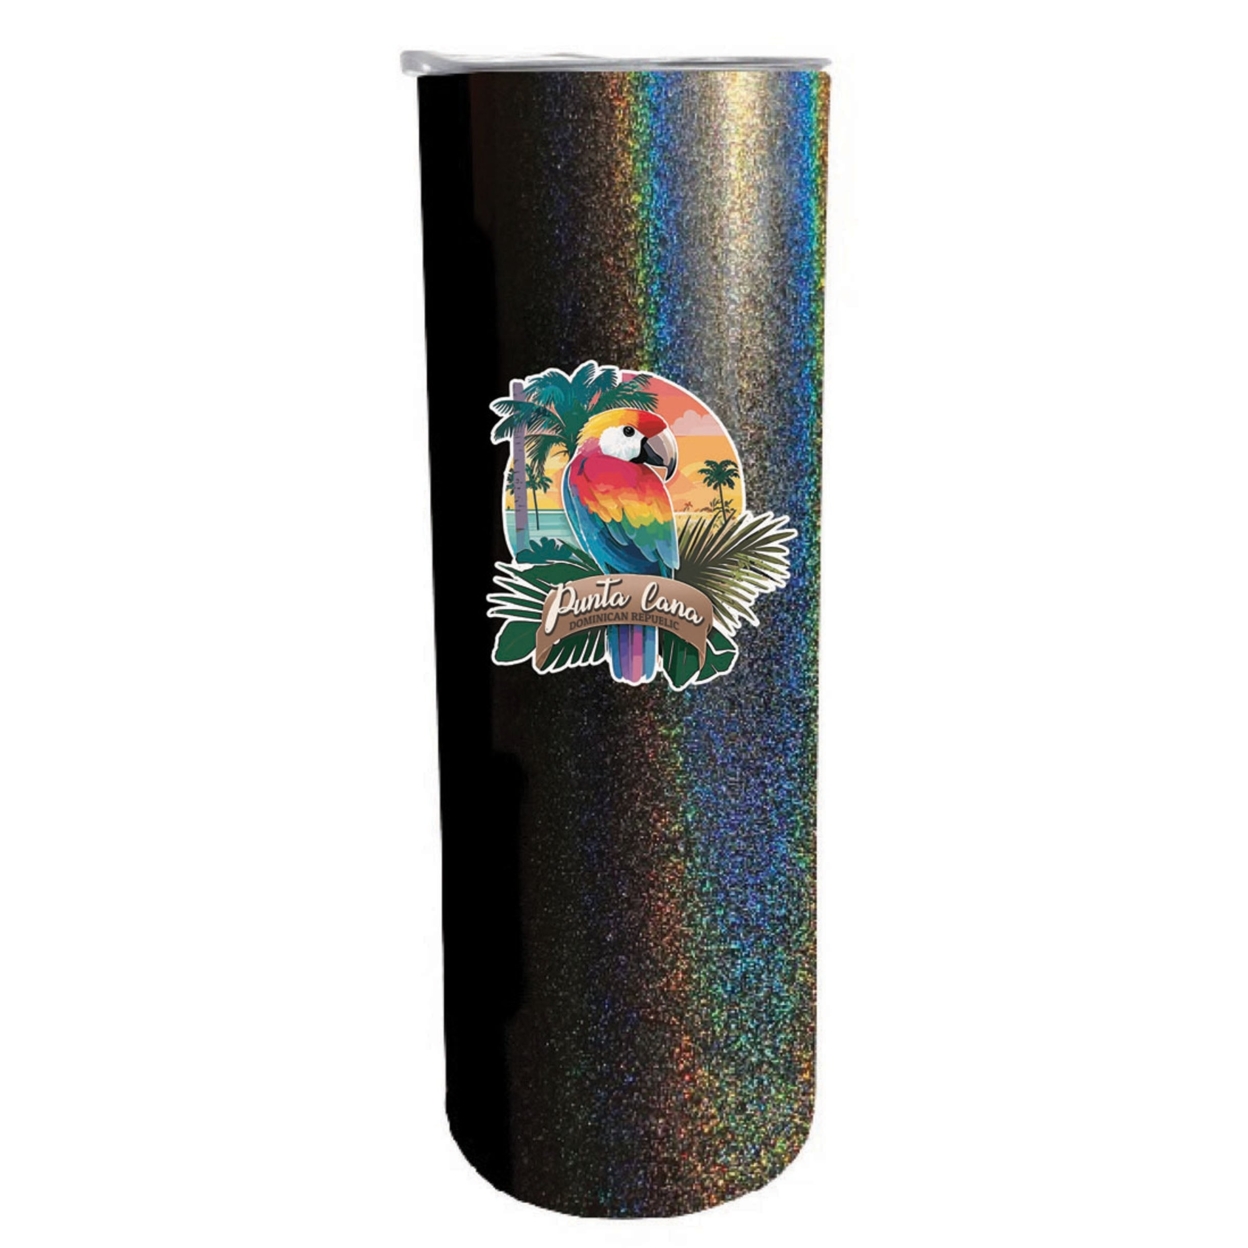 Punta Cana Dominican Republic Souvenir 20 Oz Insulated Stainless Steel Skinny Tumbler - Navy, PARROT